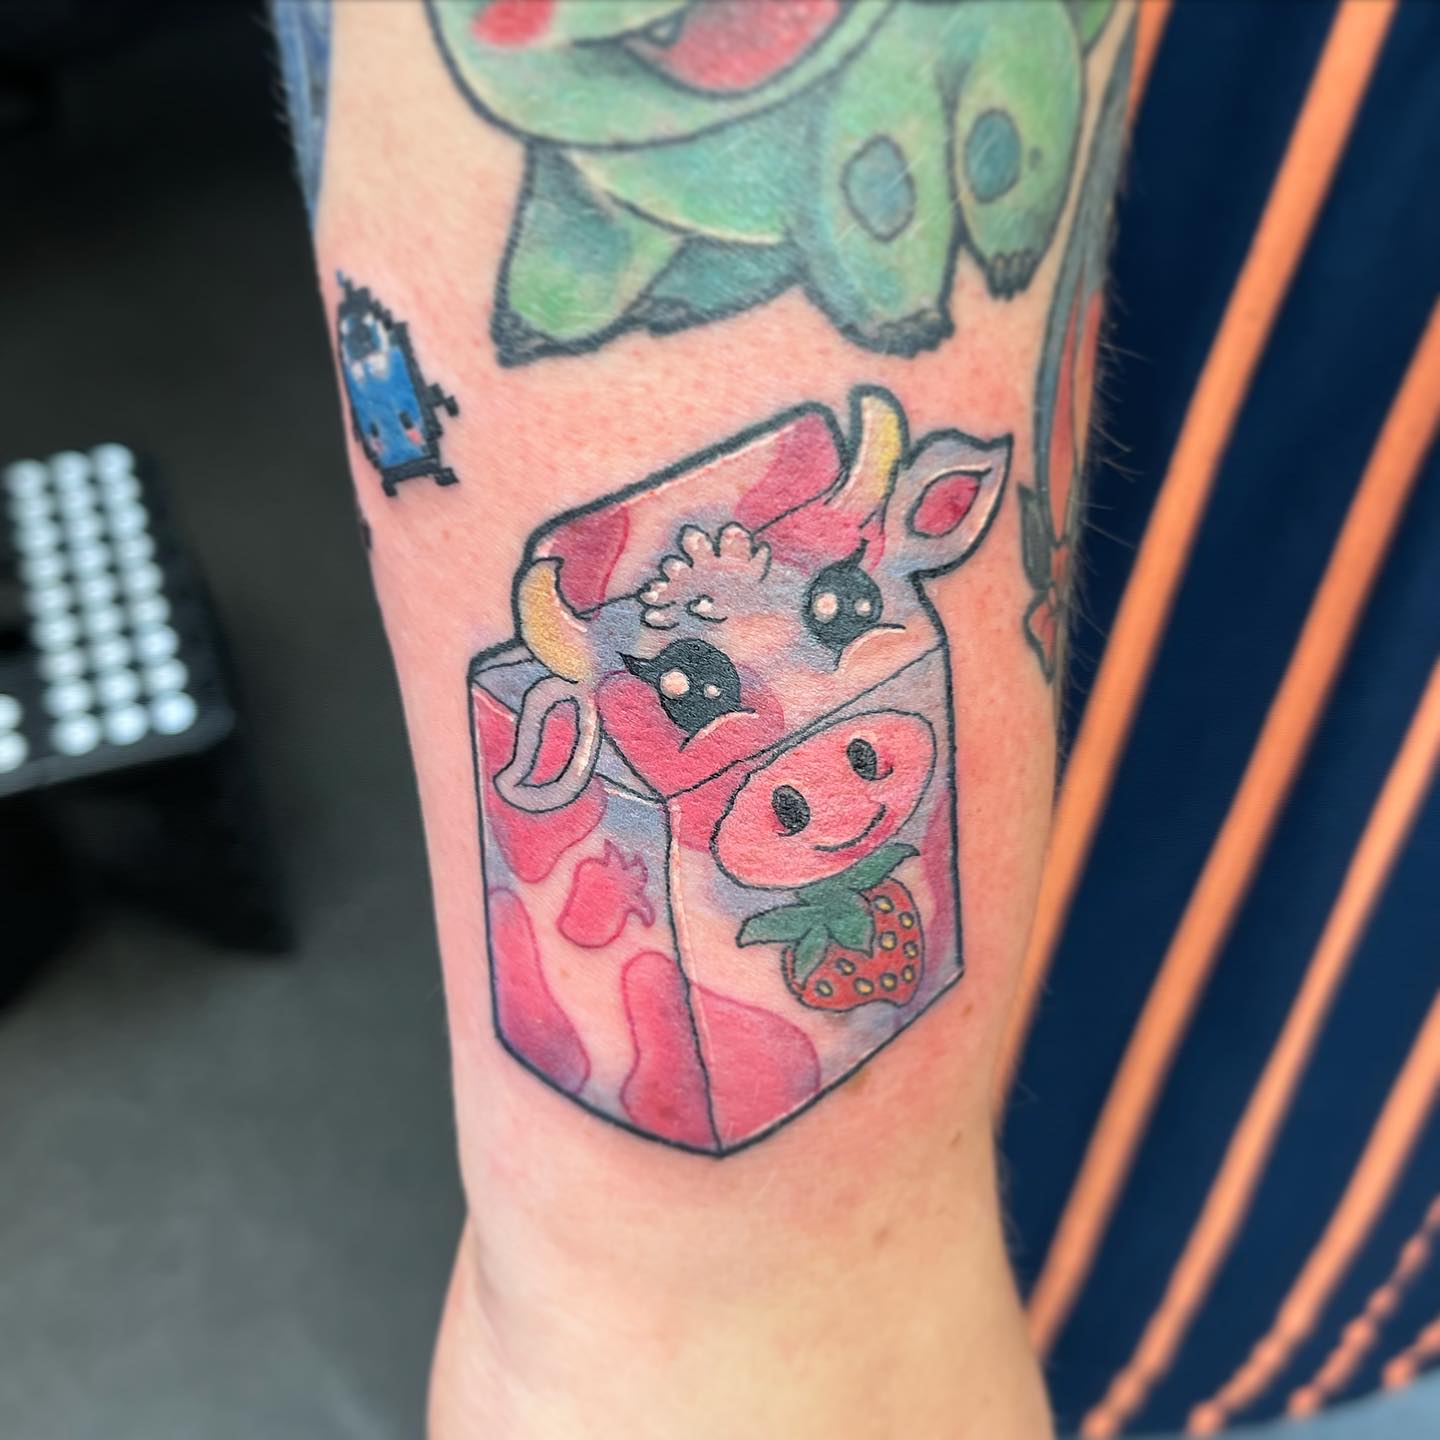 Strawberry cow, stunning! Closing some gaps on Lauren’s adorable sleeve in progress. 
Lots of fun with the tiny Junimos. Glad we could continue your birthday tradition of getting tattooed and lovely banter!

                     